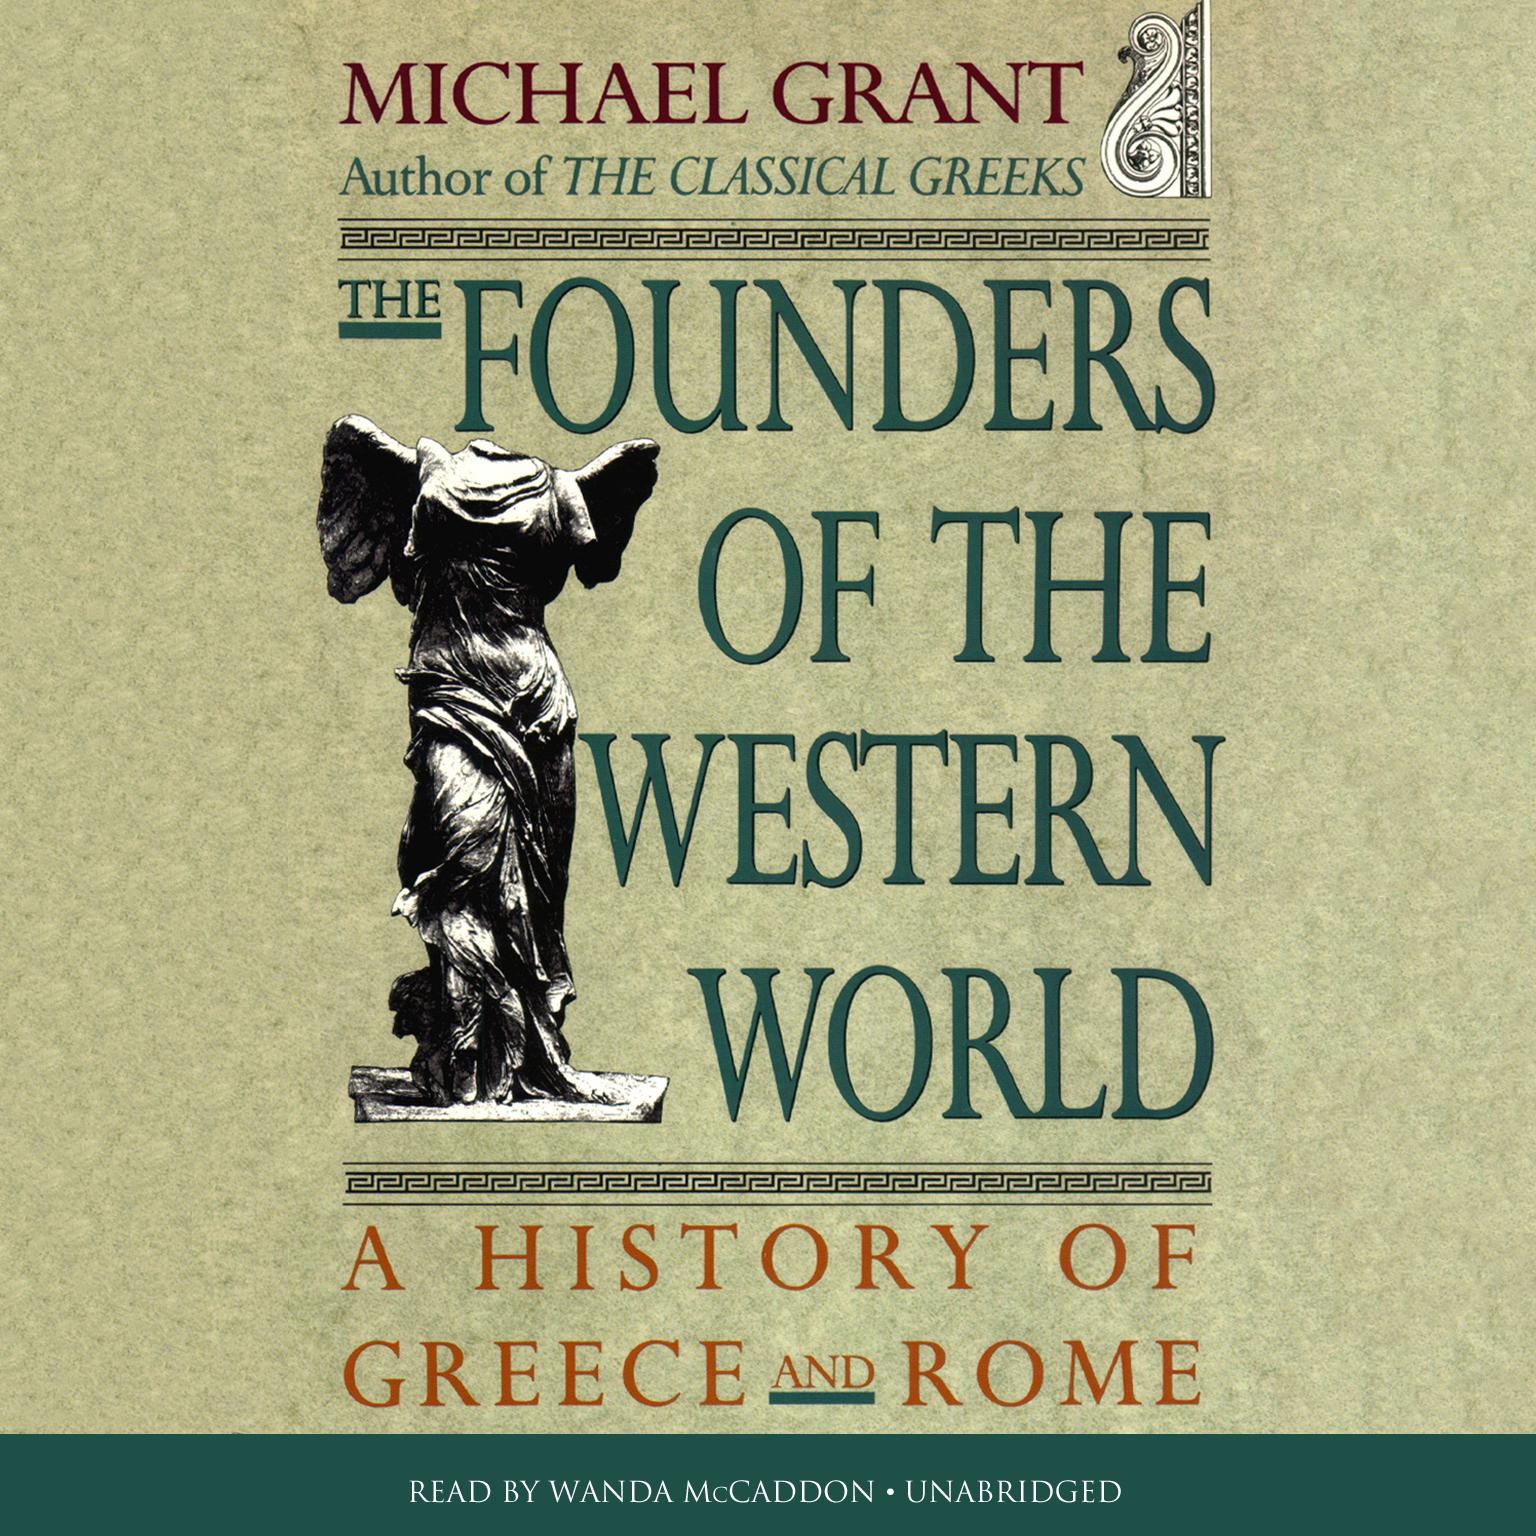 The Founders of the Western World: A History of Greece and Rome Audiobook, by Michael Grant